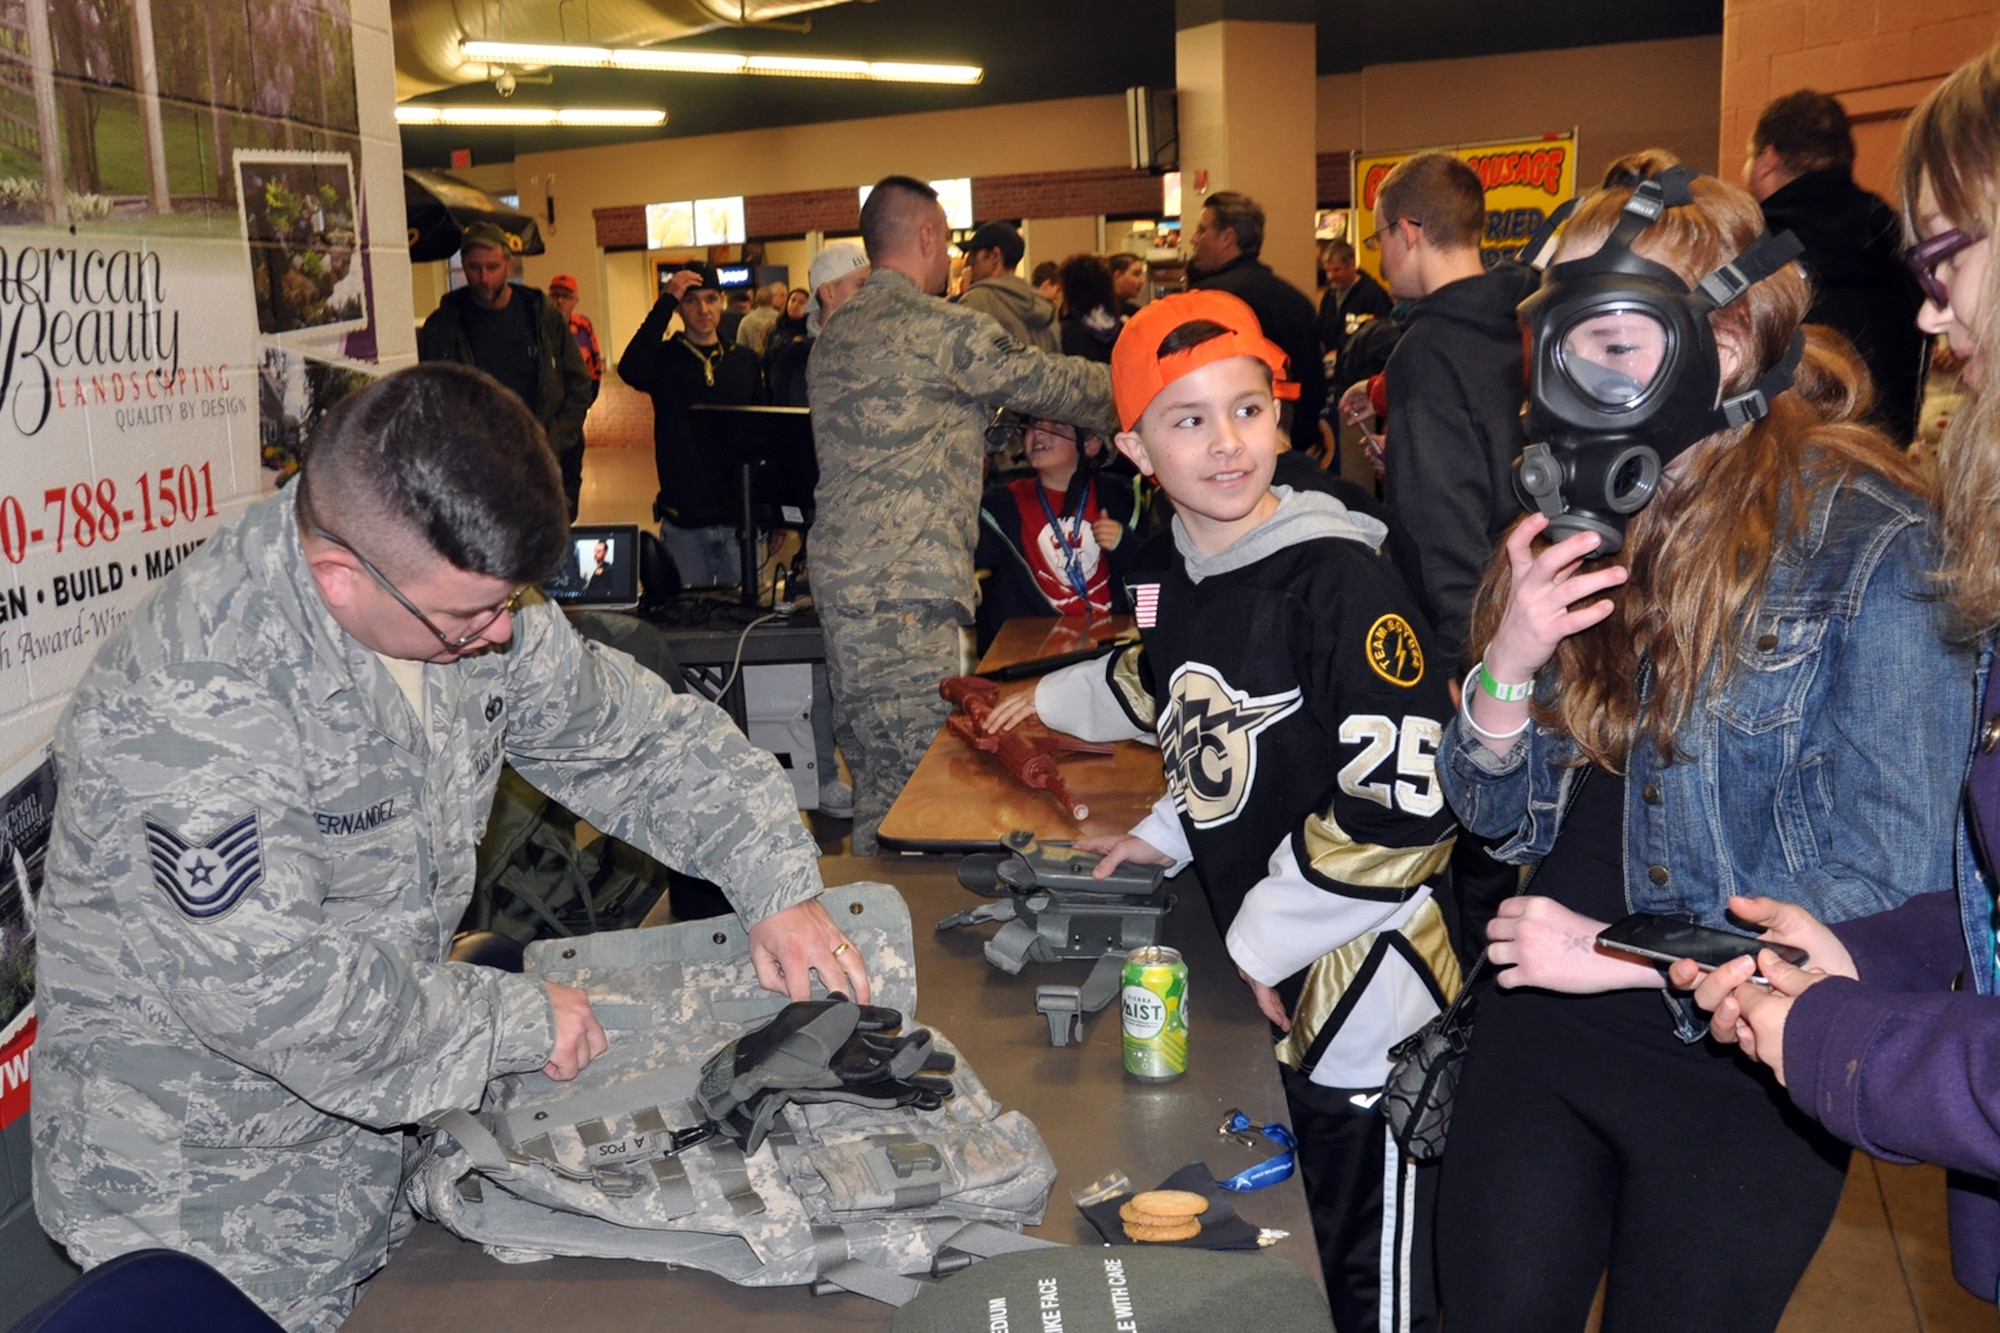 Tech. Sgt. Adam Hernandez, a fire team member assigned to 910th Security Forces Squadron, shows a body armor vest and a protective mask to hockey fans at a table display of unit equipment during pre-game festivities in the concourse of the Covelli Centre here, April 2, 2016. A group of Citizen Airmen, based at nearby Youngstown Air Reserve Station, Ohio, participated in YARS Night Out activities before and during the game. The Phantoms, a member of the United States Hockey League, defeated the Omaha Lancers 4-1 in front of a home ice crowd of more than 3000 fans. (U.S. Air Force photo/Master Sgt. Bob Barko Jr.)